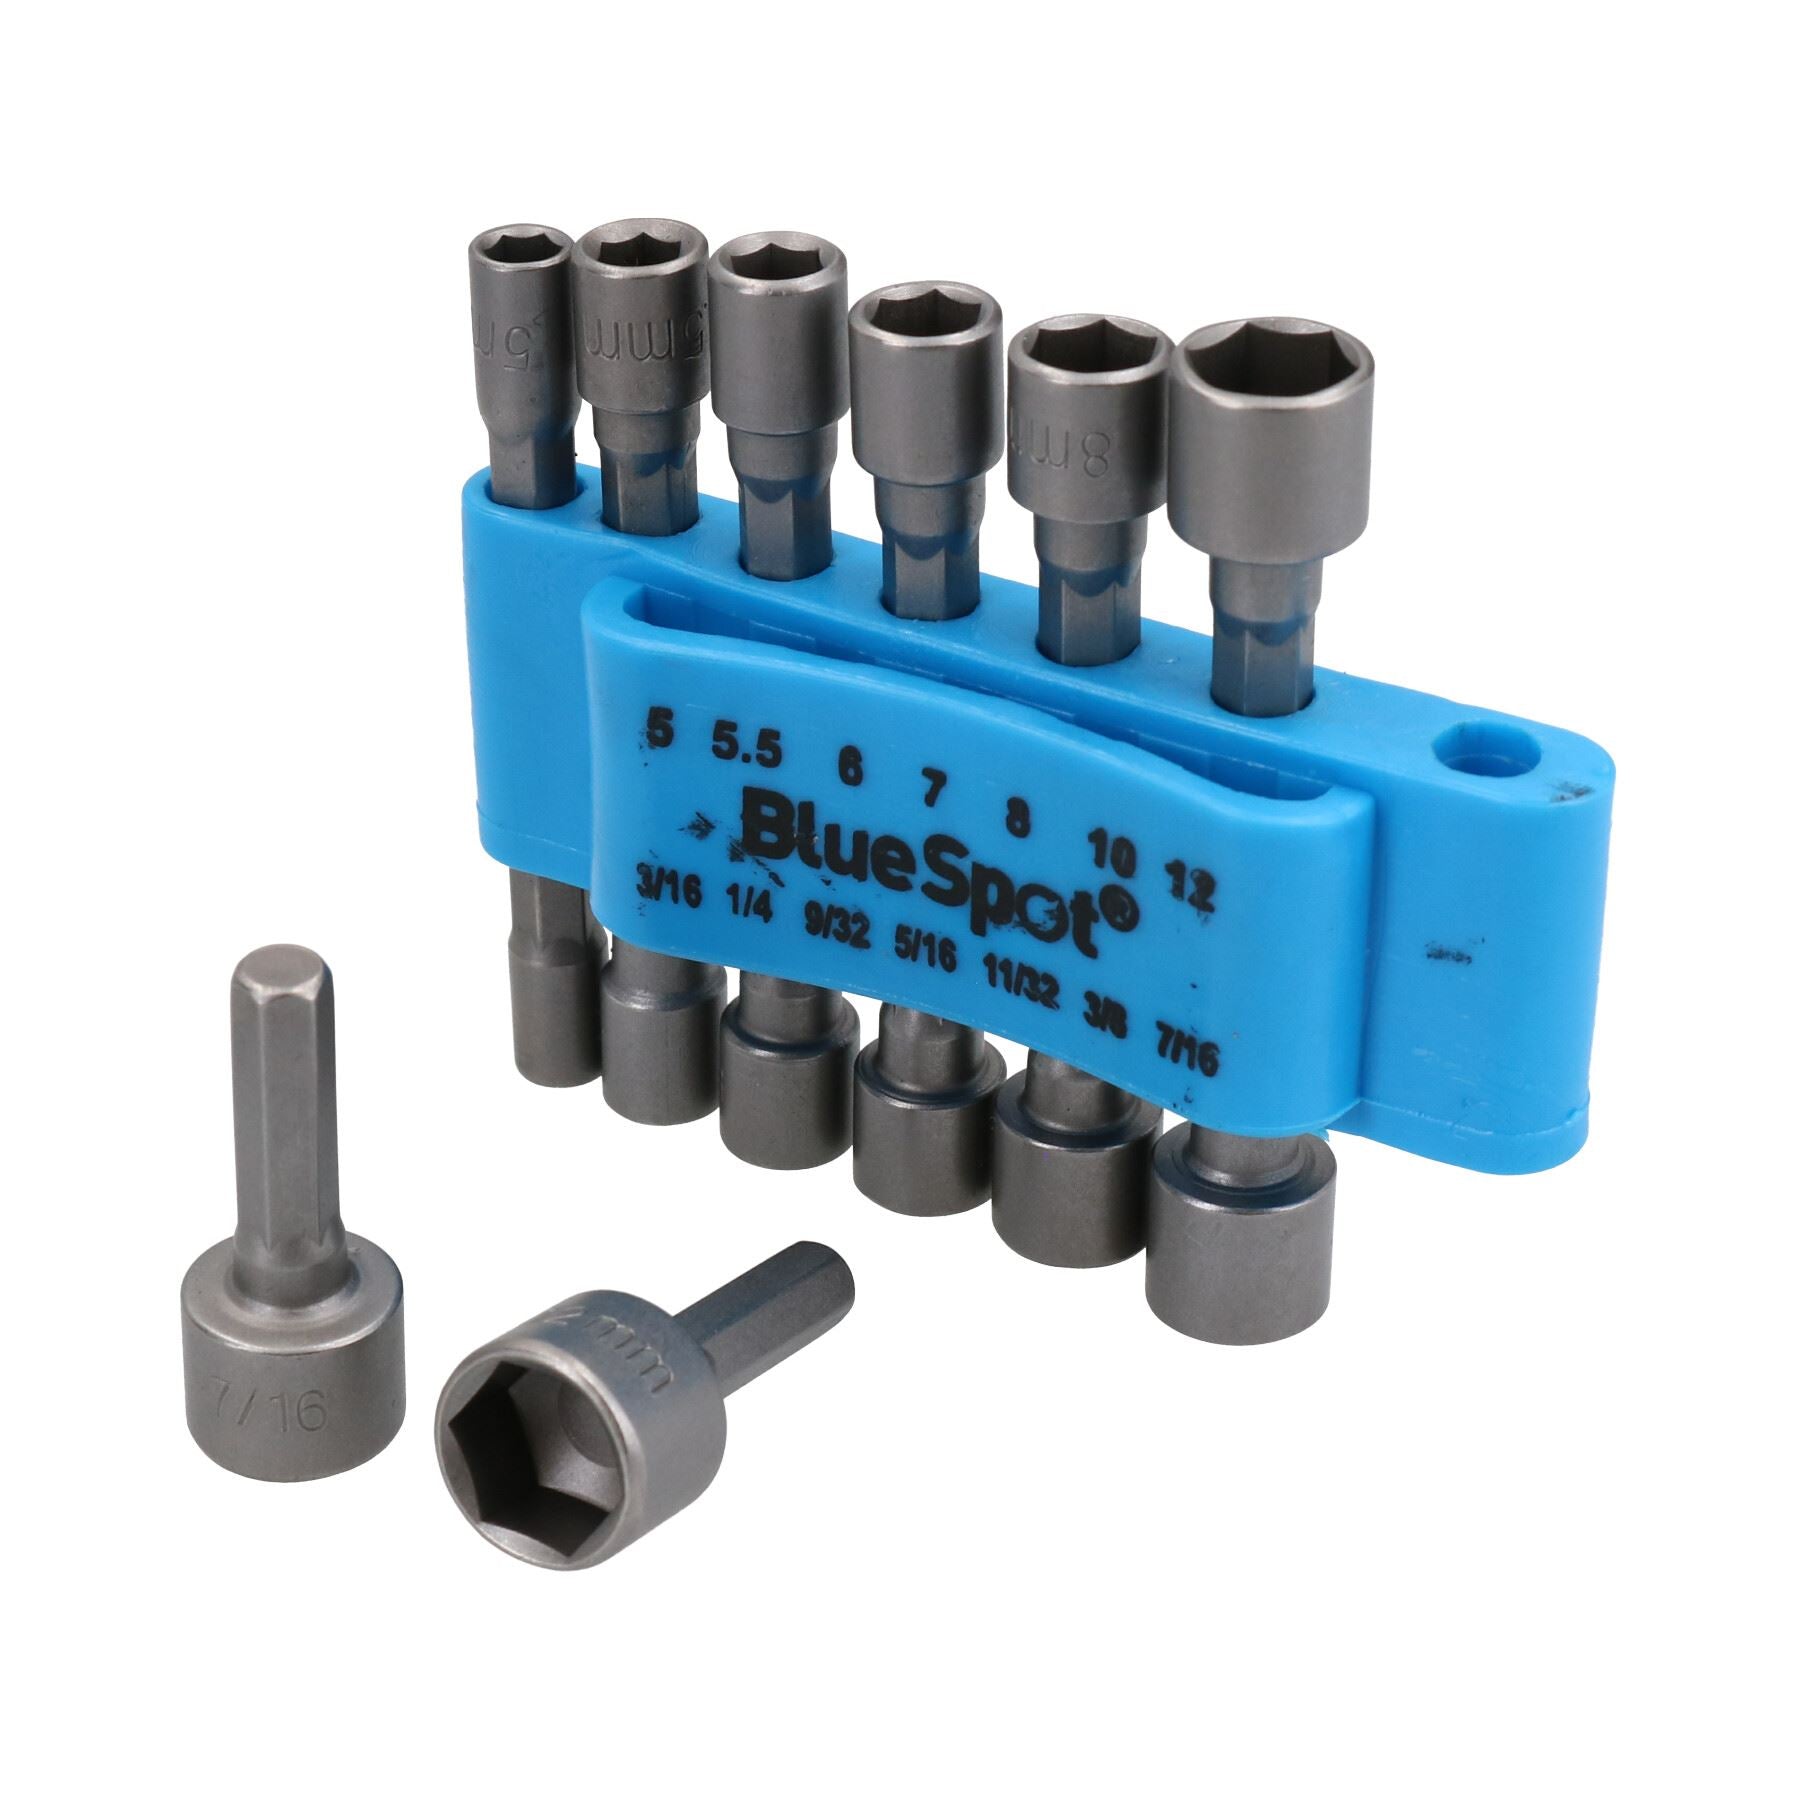 14pc Nut Driver Socket Set Metric + Imperial Sizes 5mm – 12mm / 3/16” – 7/16”